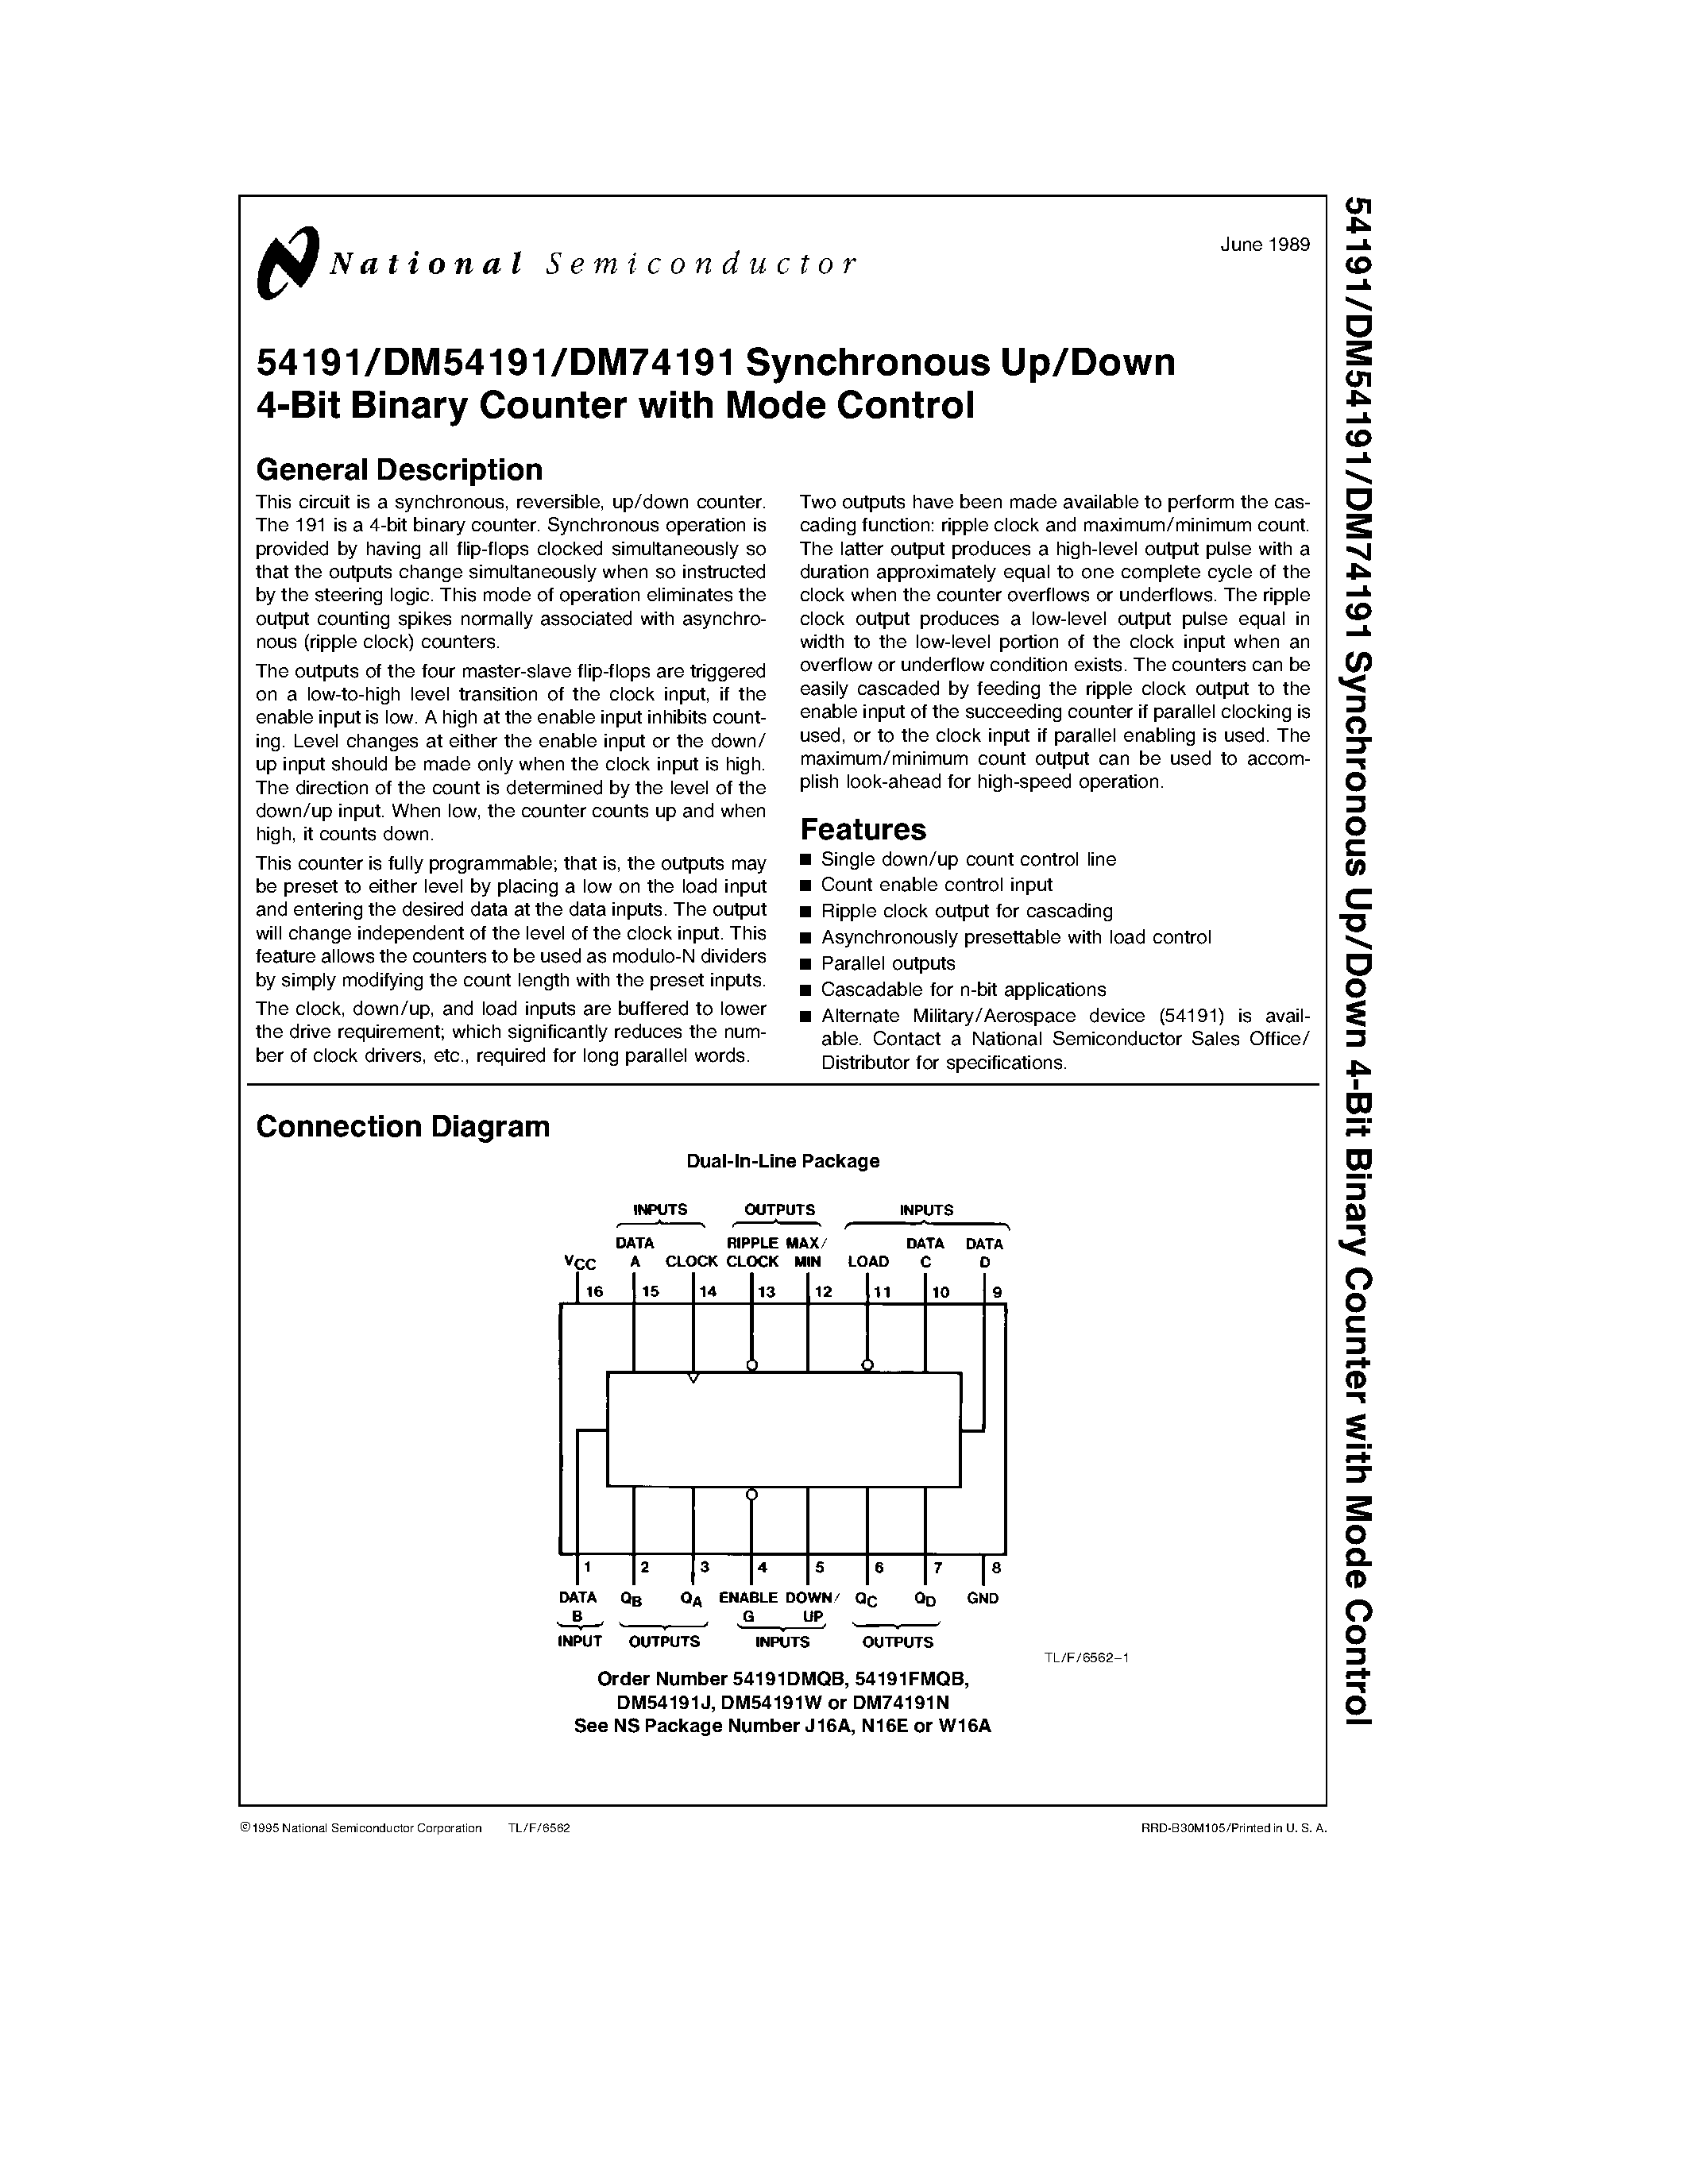 Datasheet 54191DMQB - Synchronous Up/Down 4-Bit Binary Counter with Mode Control page 1